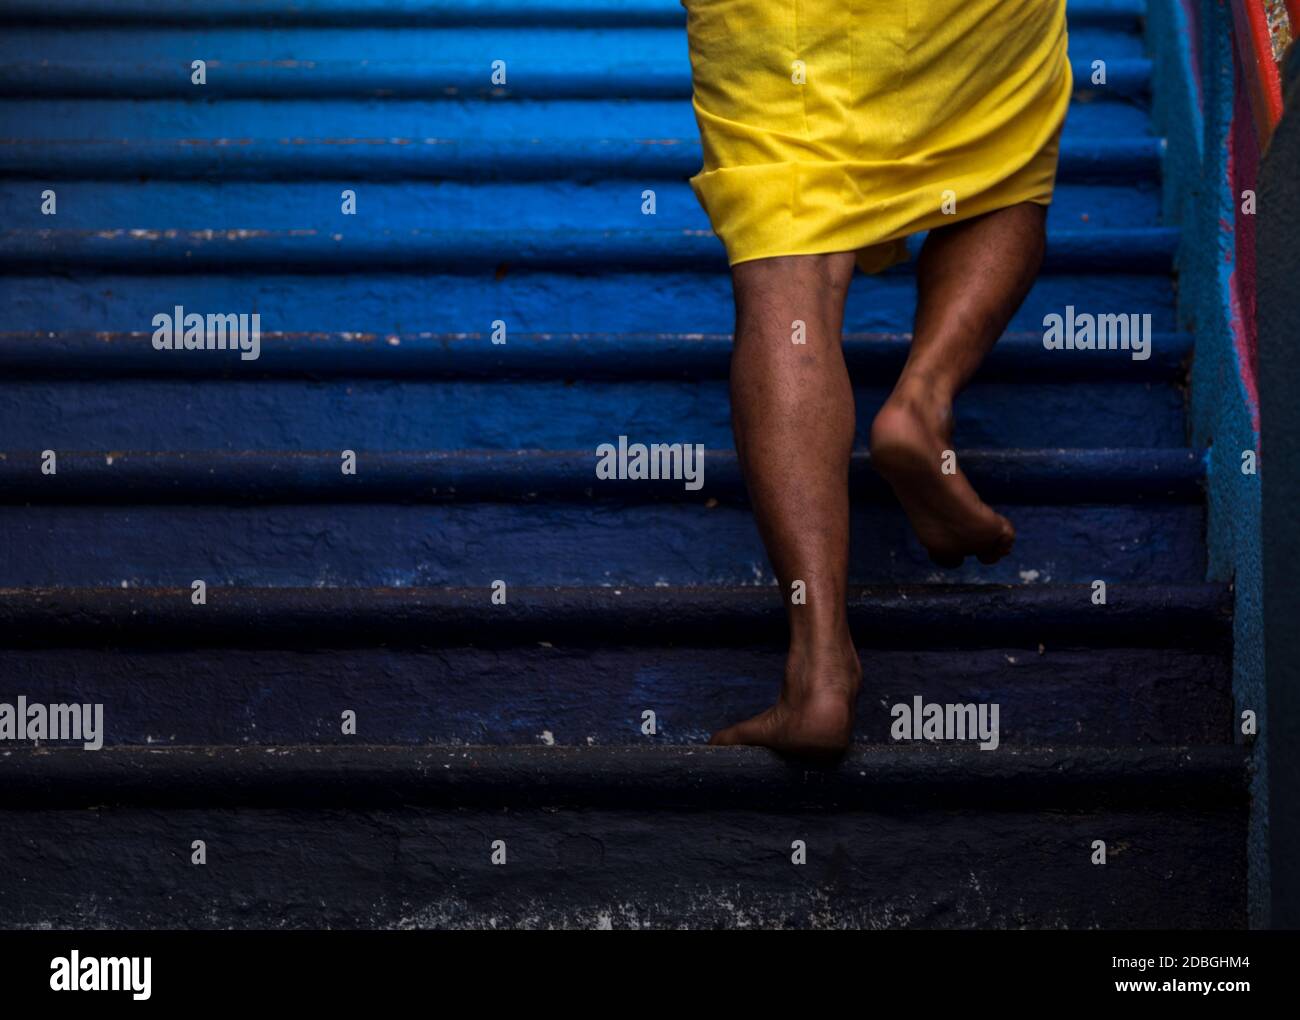 A Hindu prayer walking up stairs barefooted Stock Photo